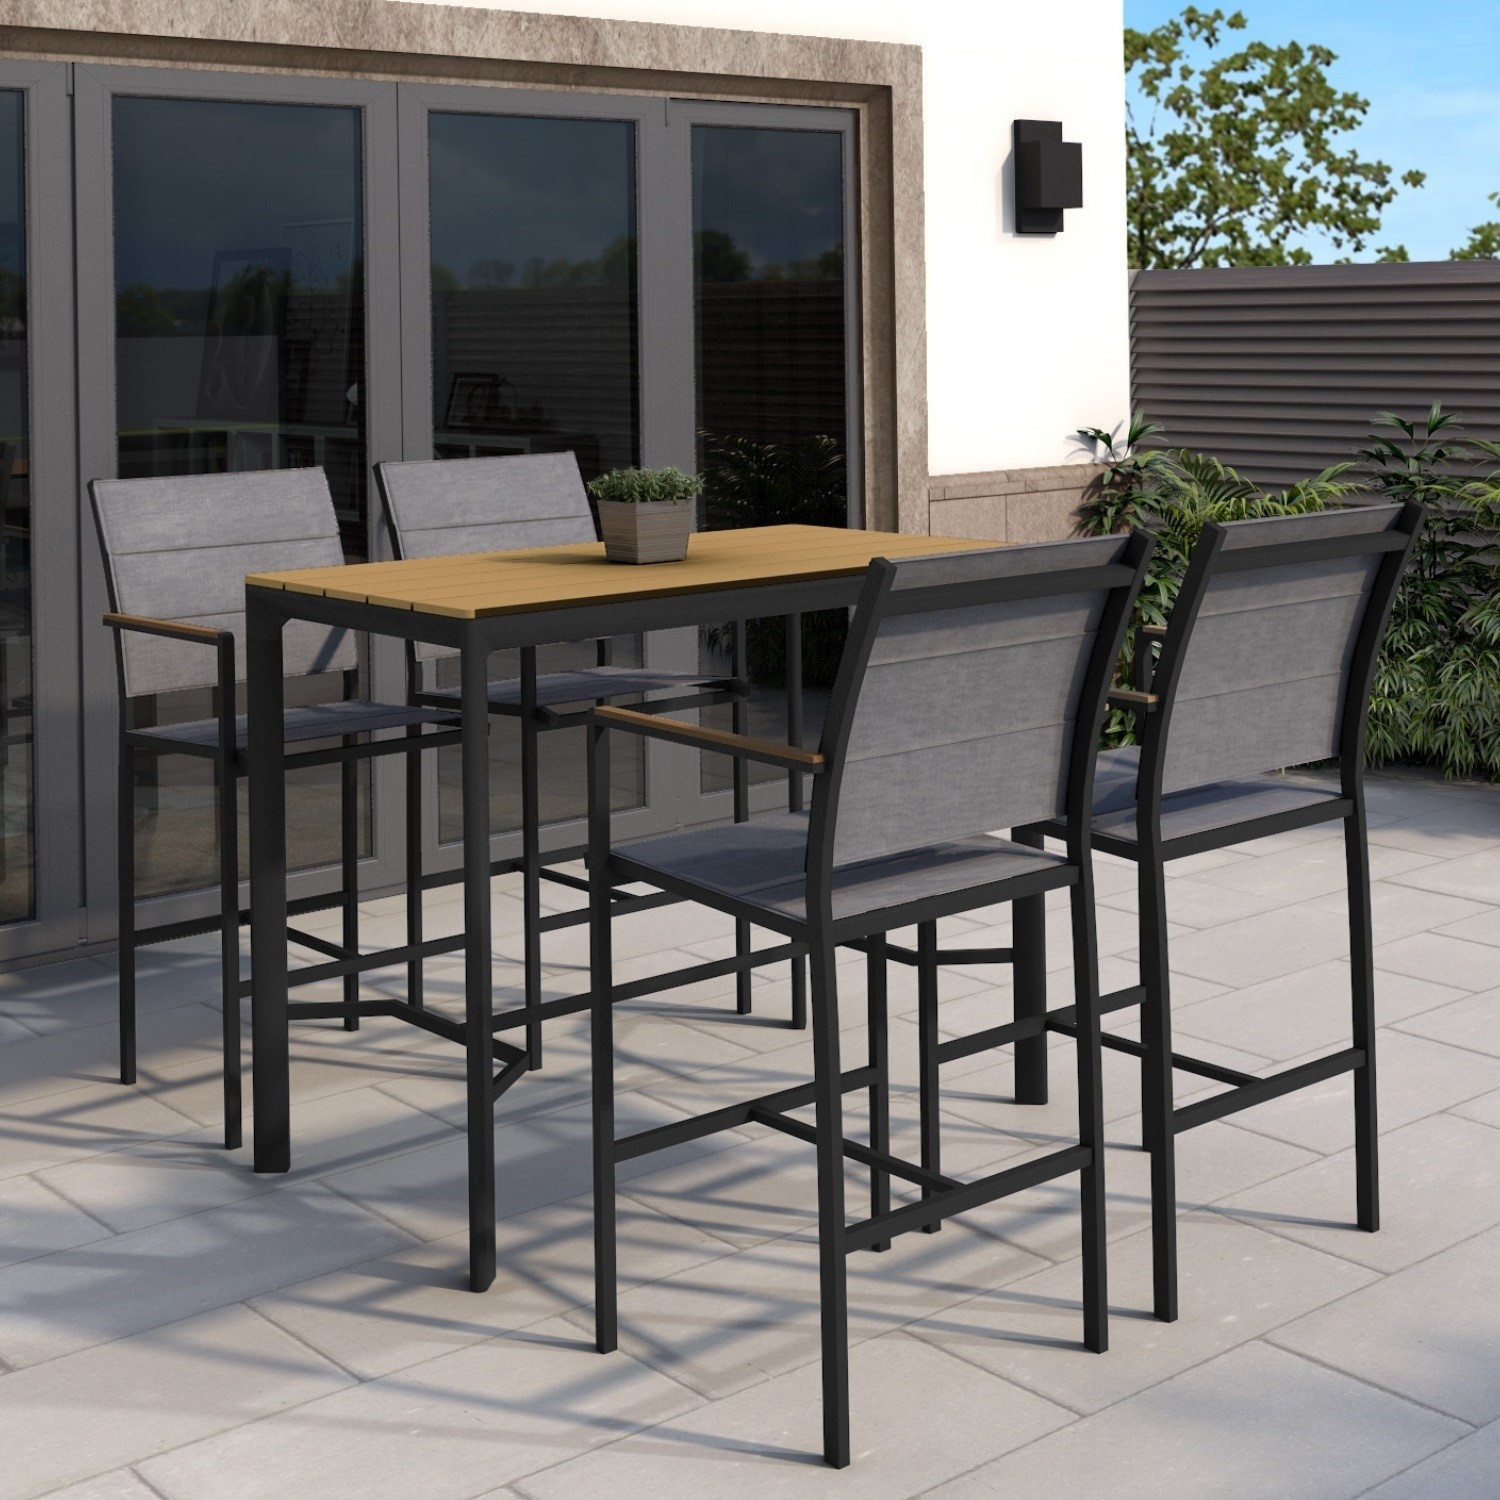 Black Outdoor Bar Set With 4 Stools, Outdoor Bar Set With Stools